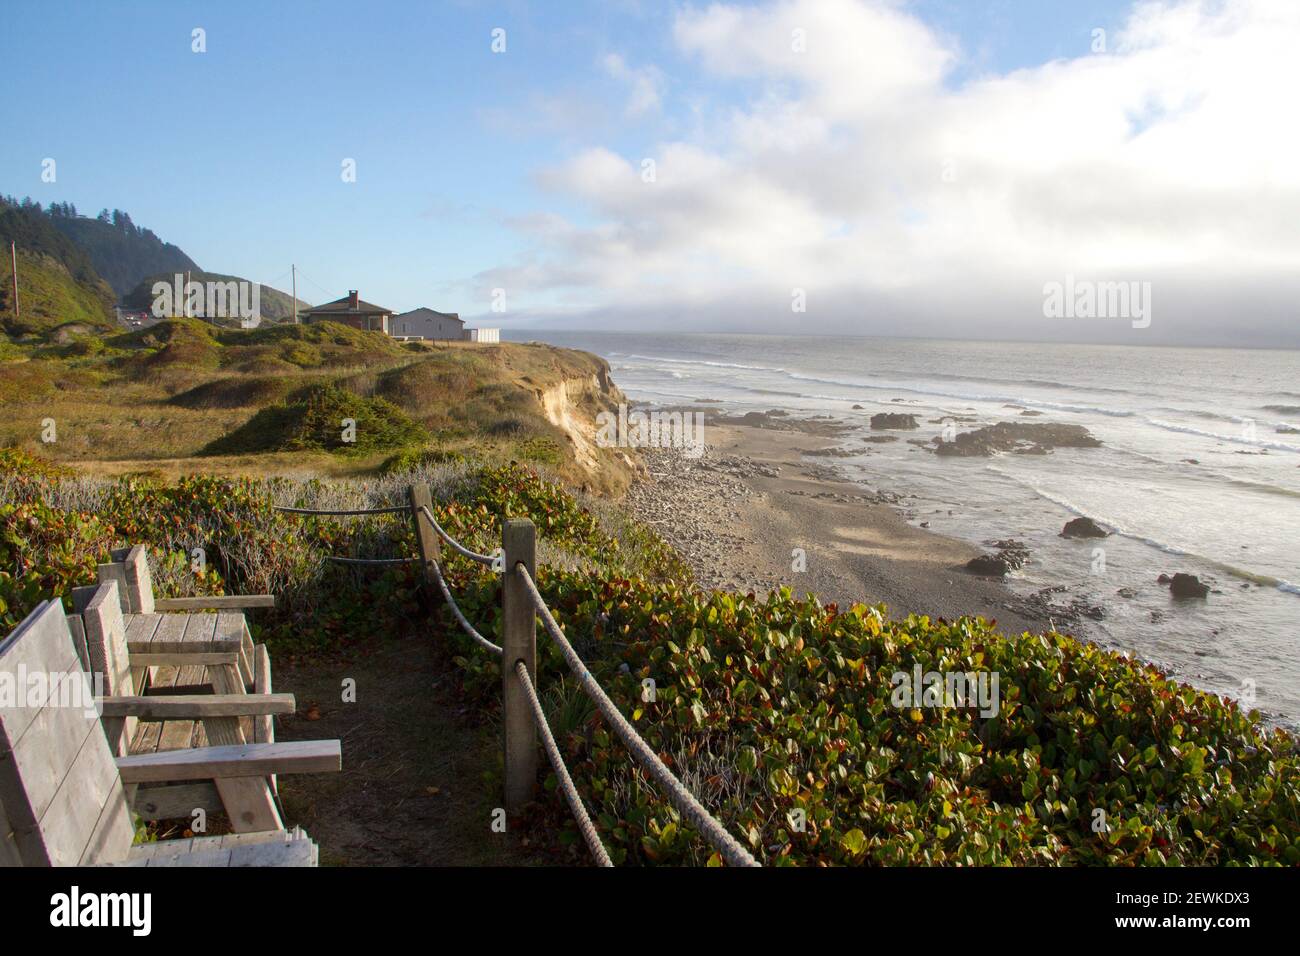 A view of the beach from a bluff in Yachats, Oregon, United States. Stock Photo